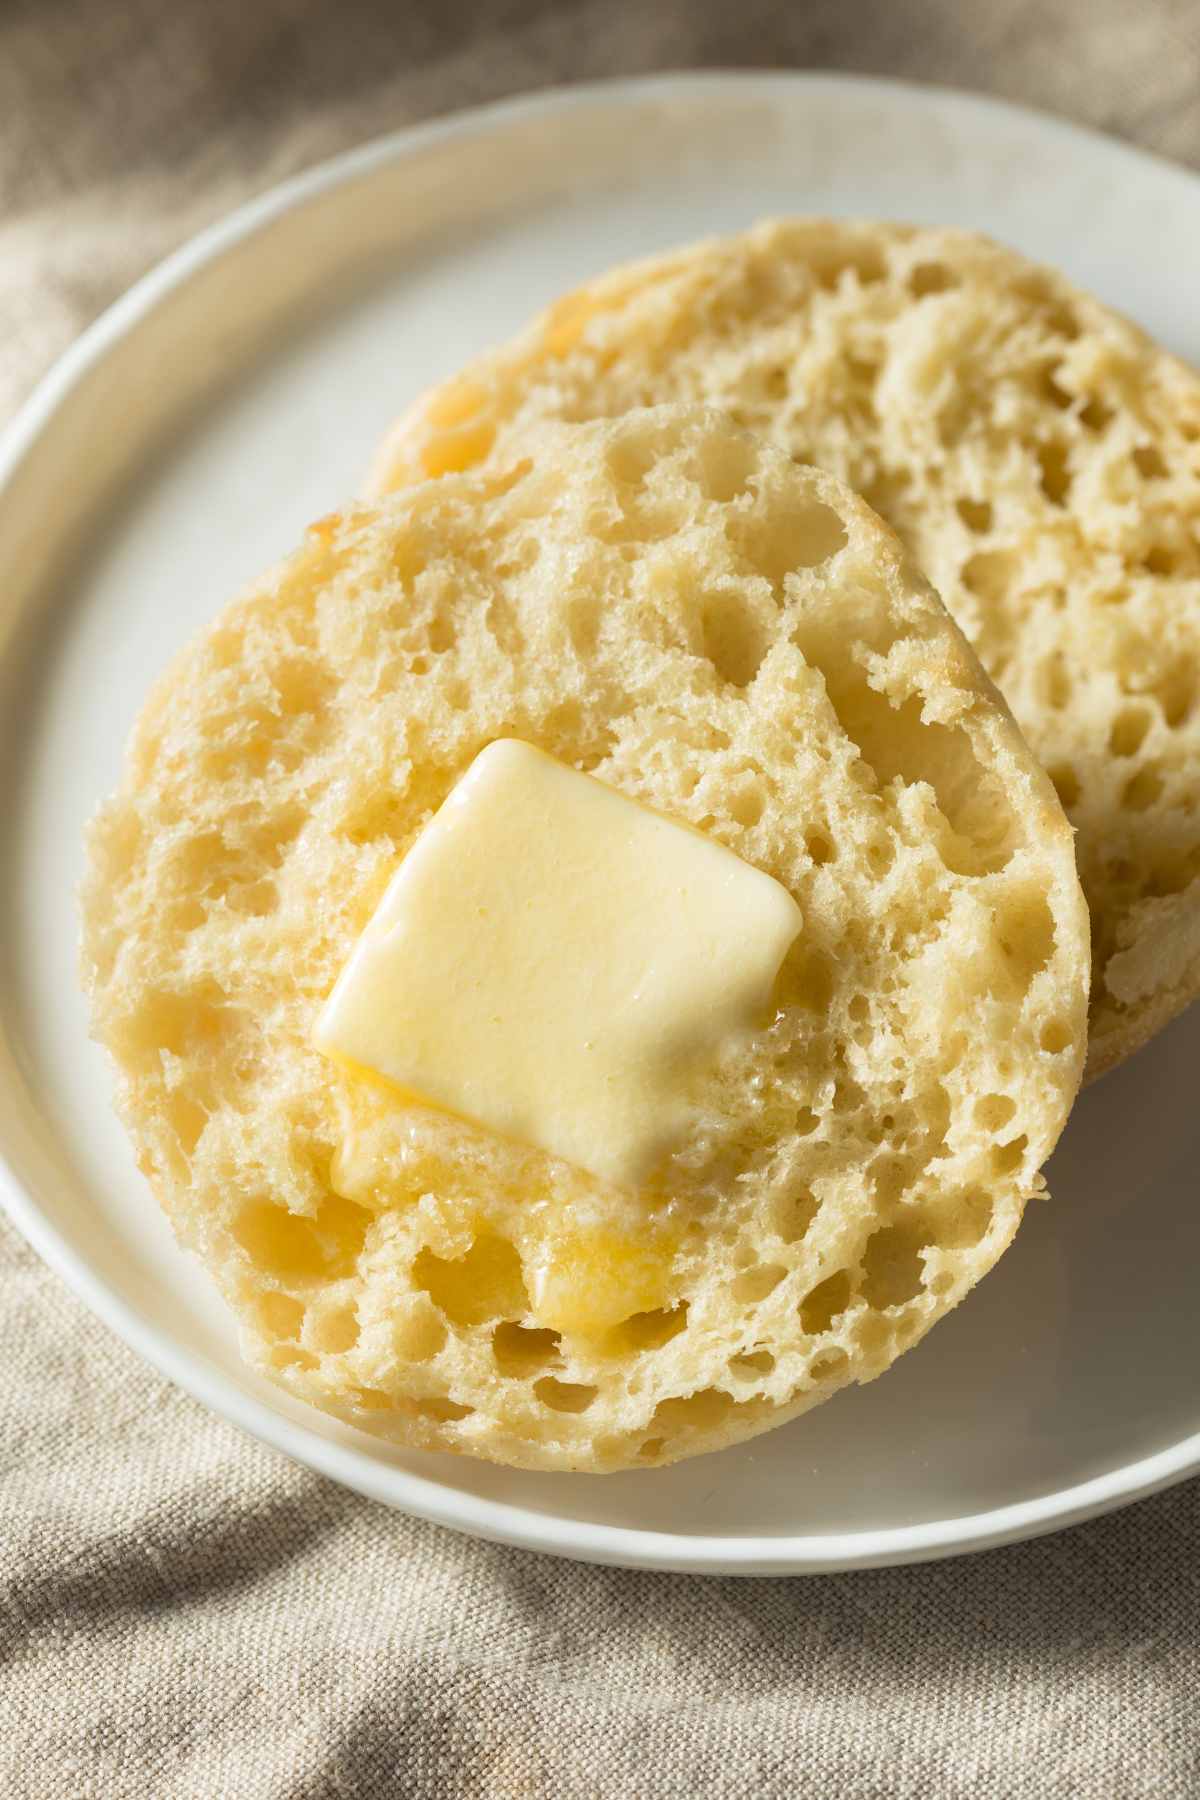 Ever wonder how many carbs are in English muffins? Are they keto-friendly? With the rise of the ketogenic diet, you may want to know whether English muffins can fit into a low-carb, high-fat lifestyle. In this article, we'll explore the carb content in English muffins and share with you a keto-friendly recipe to enjoy this breakfast classic.